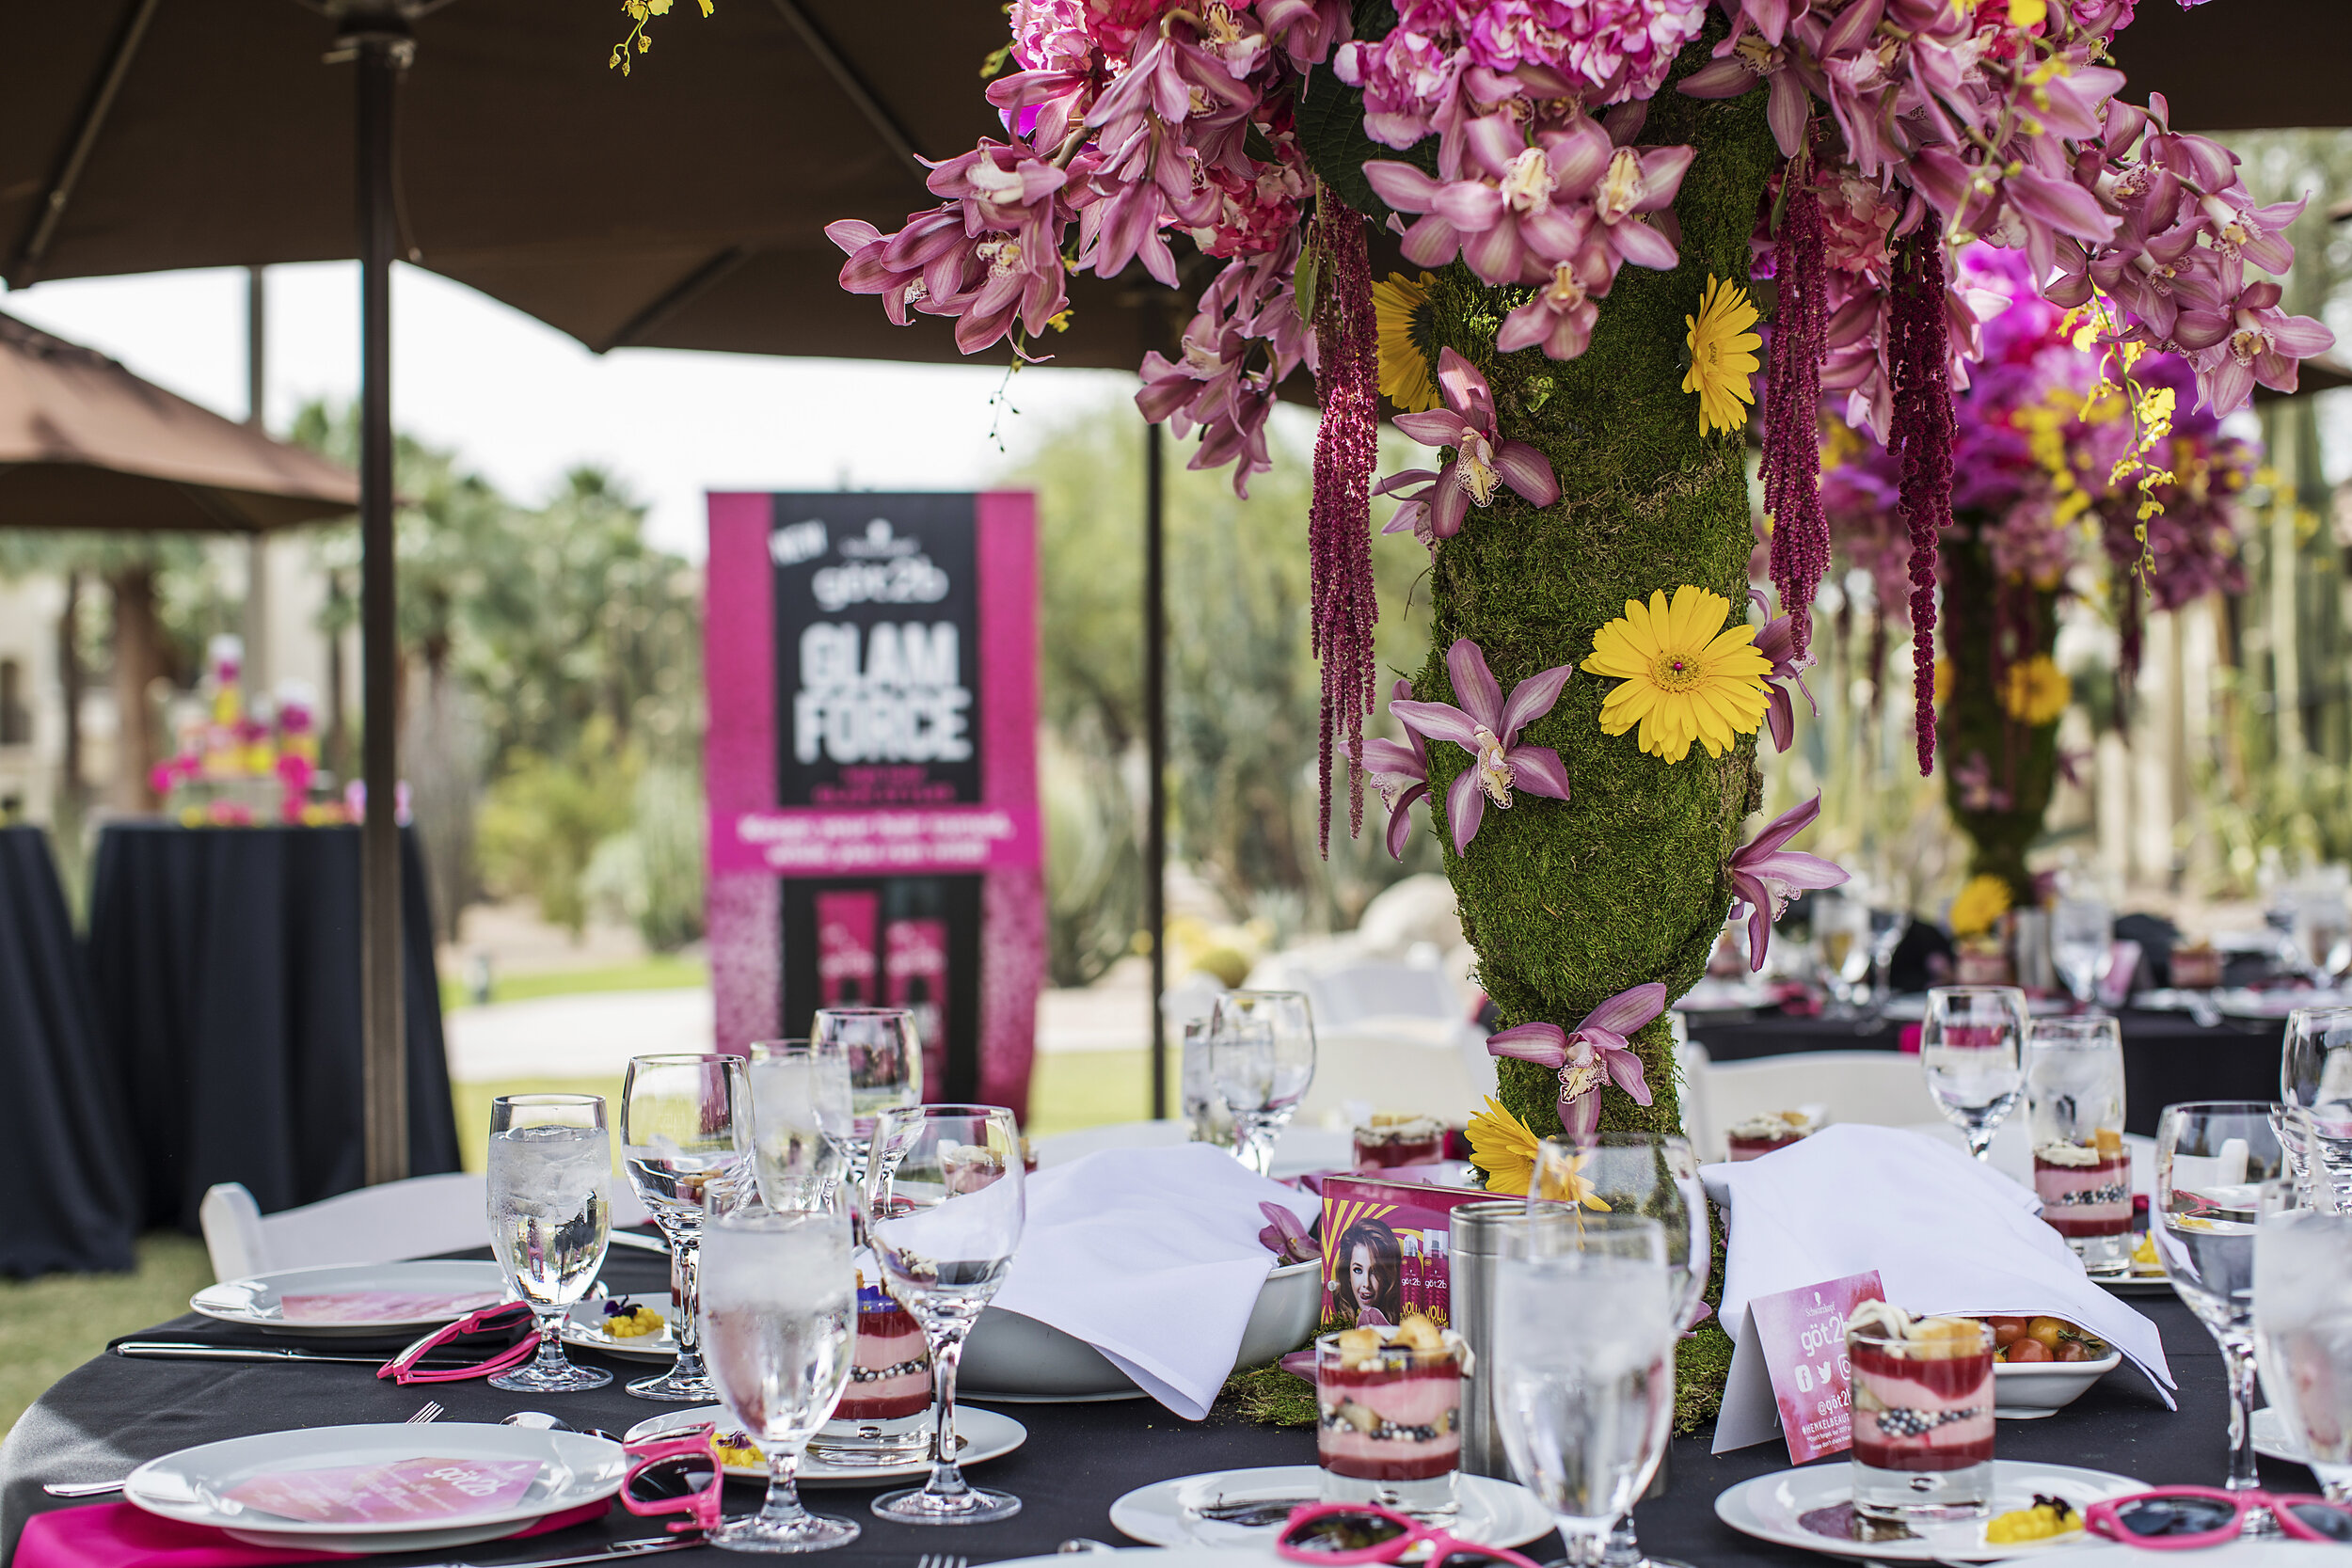 7 dramatic floral centerpiece pink yellow flowers orchid centerpiece outdoor lunch beauty product launch party Life Design Events photos by Largo Photography.jpg